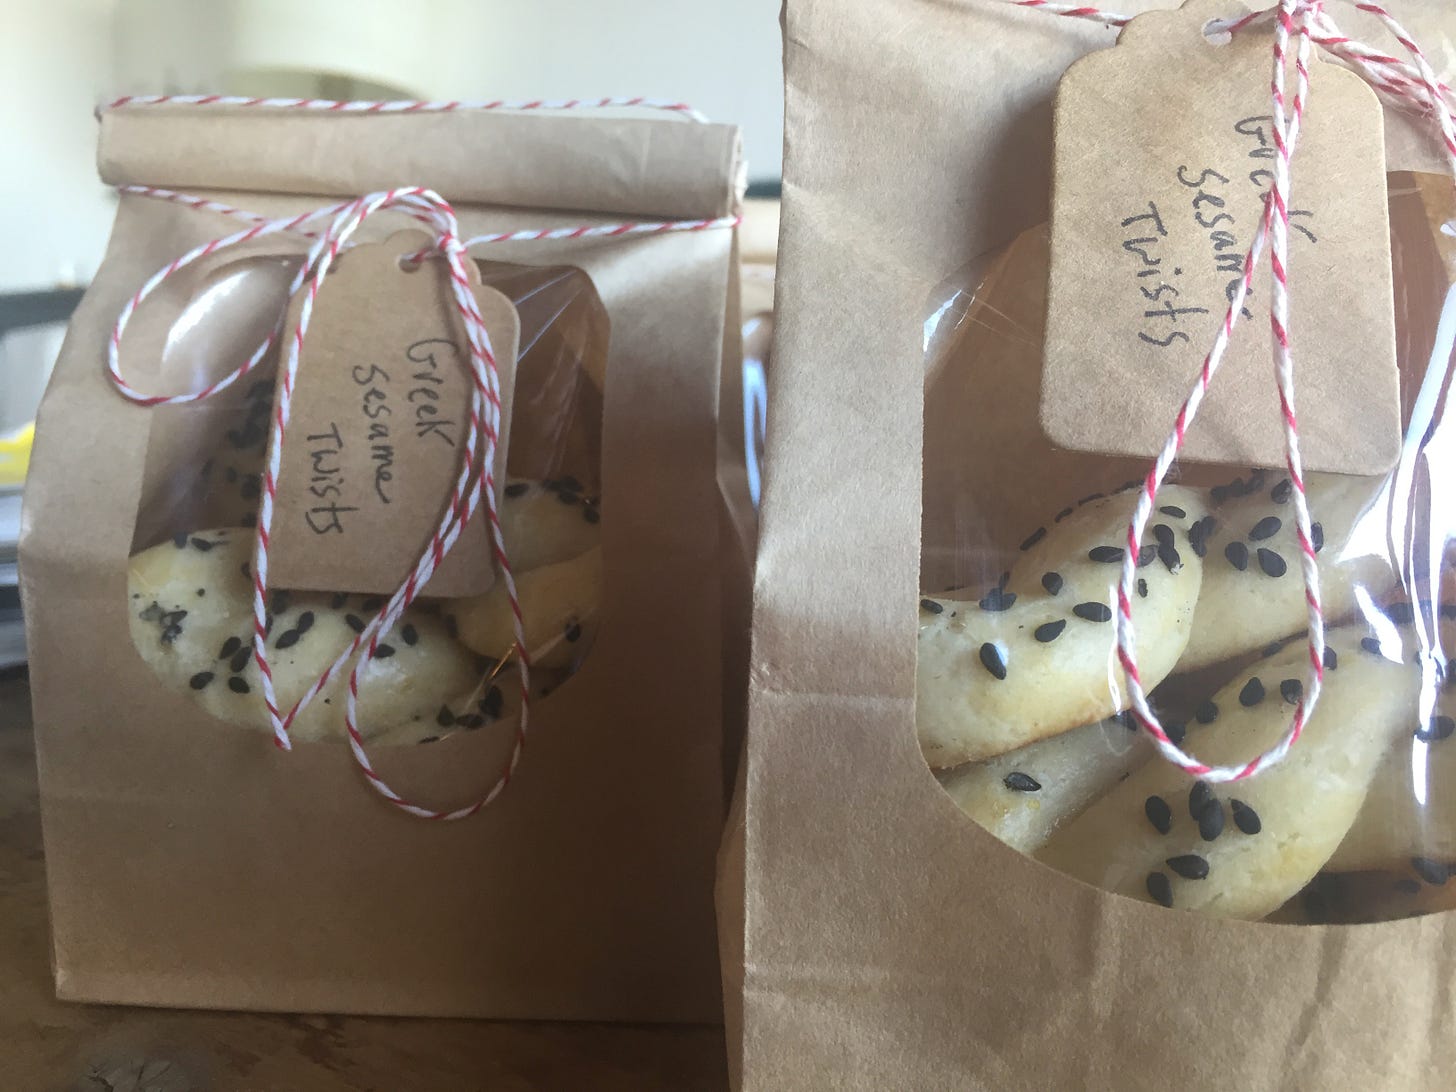 Two small brown bags with windows showing pale cookies studded with sesame seeds inside. The bags are tied around the tops with red and white twine and have small handwritten tags that say ‘Greek Sesame Twists’.